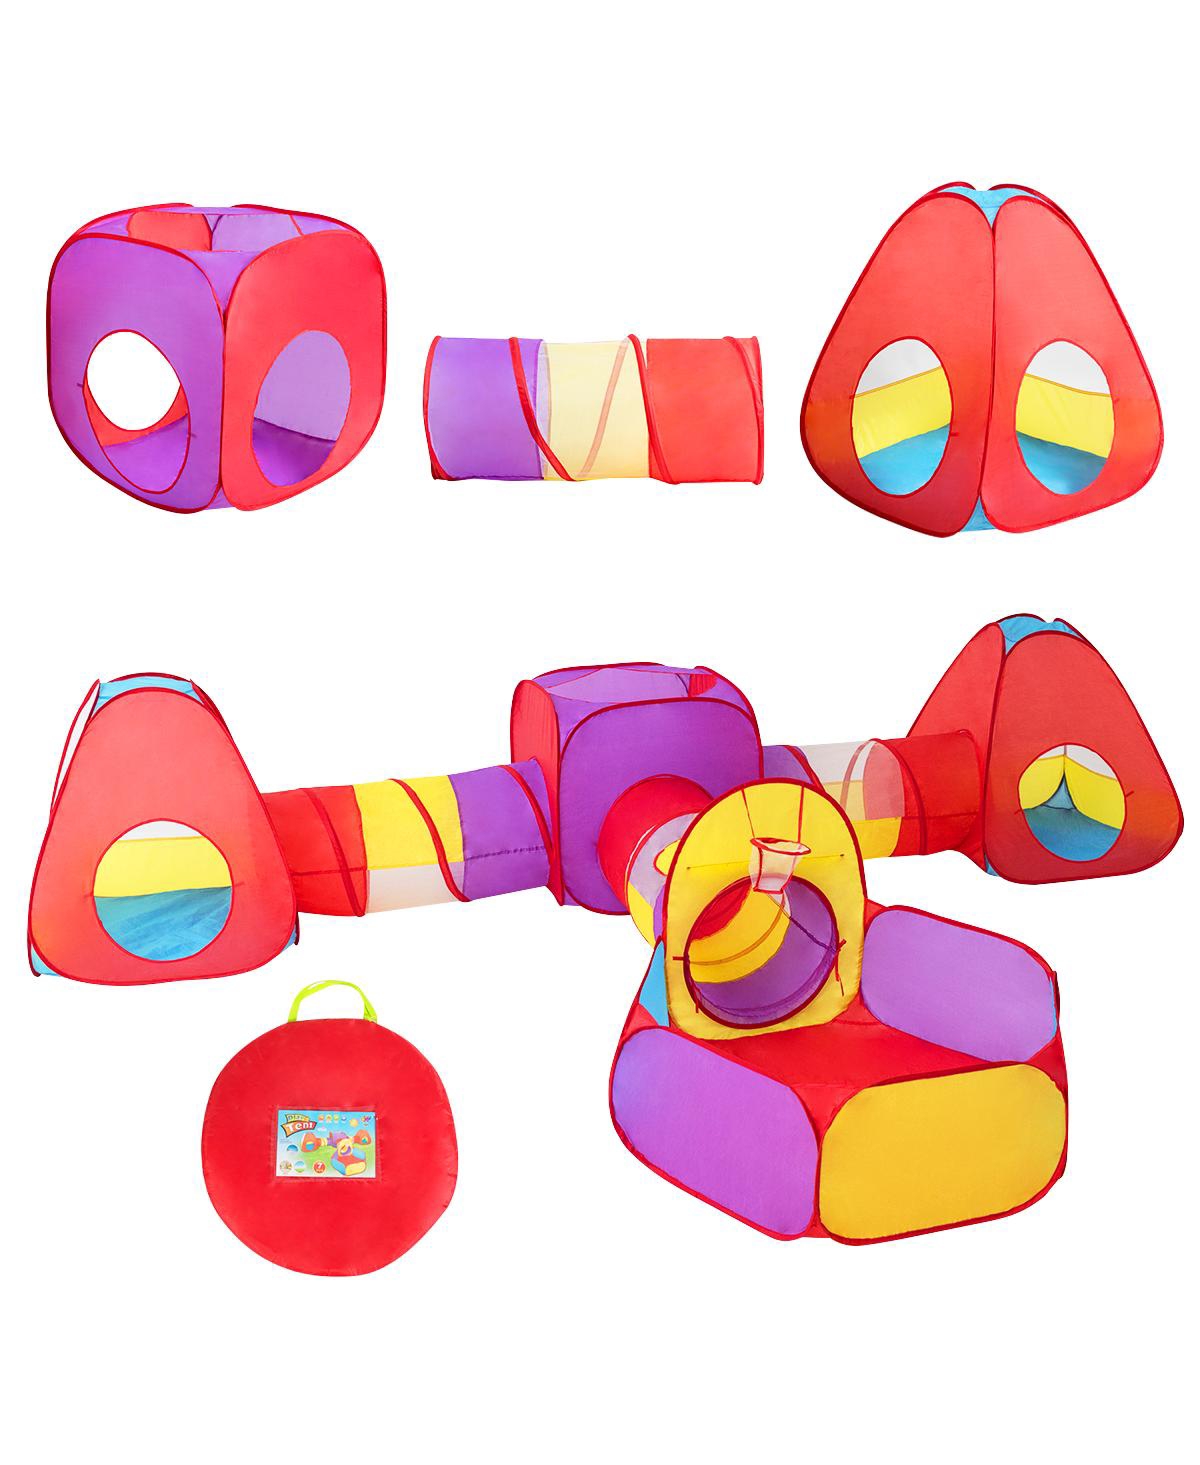 Costway 7pc Kids Ball Pit Play Tents & Tunnels Pop Up Baby Toy Gifts In Red